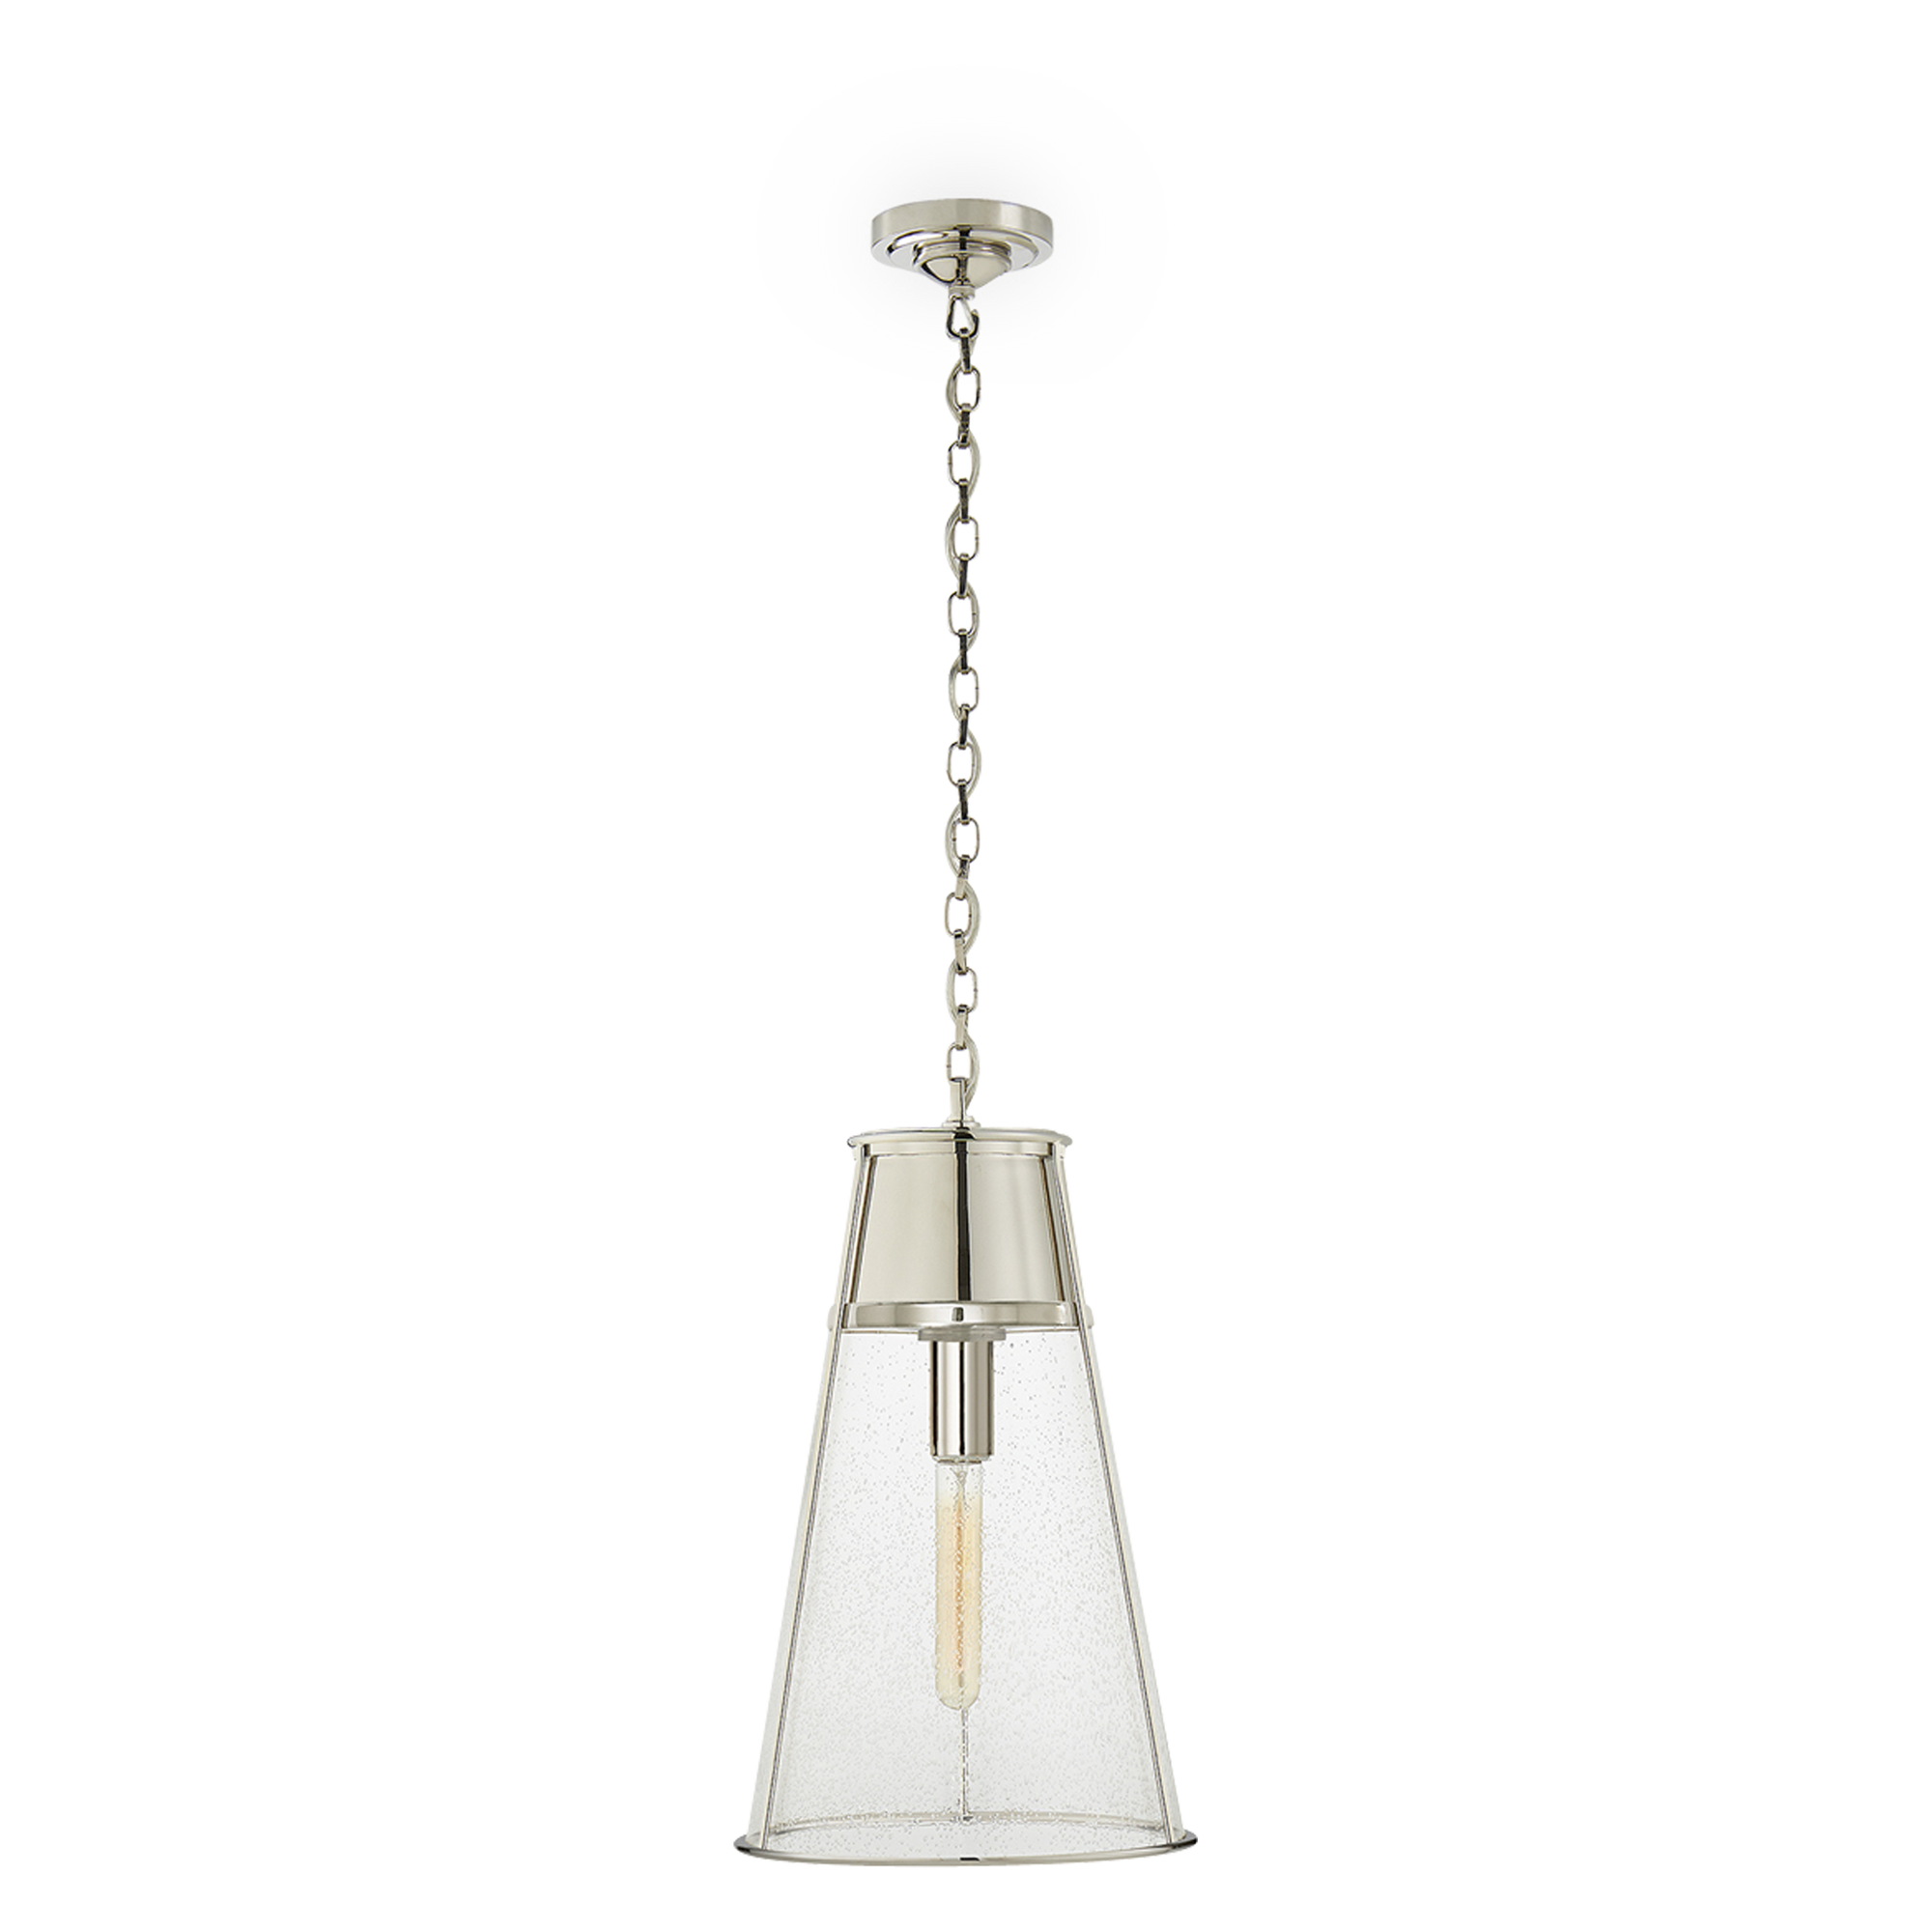 A seeded clear glass shade suspended from polished nickel forms this sleek and modern pendant.